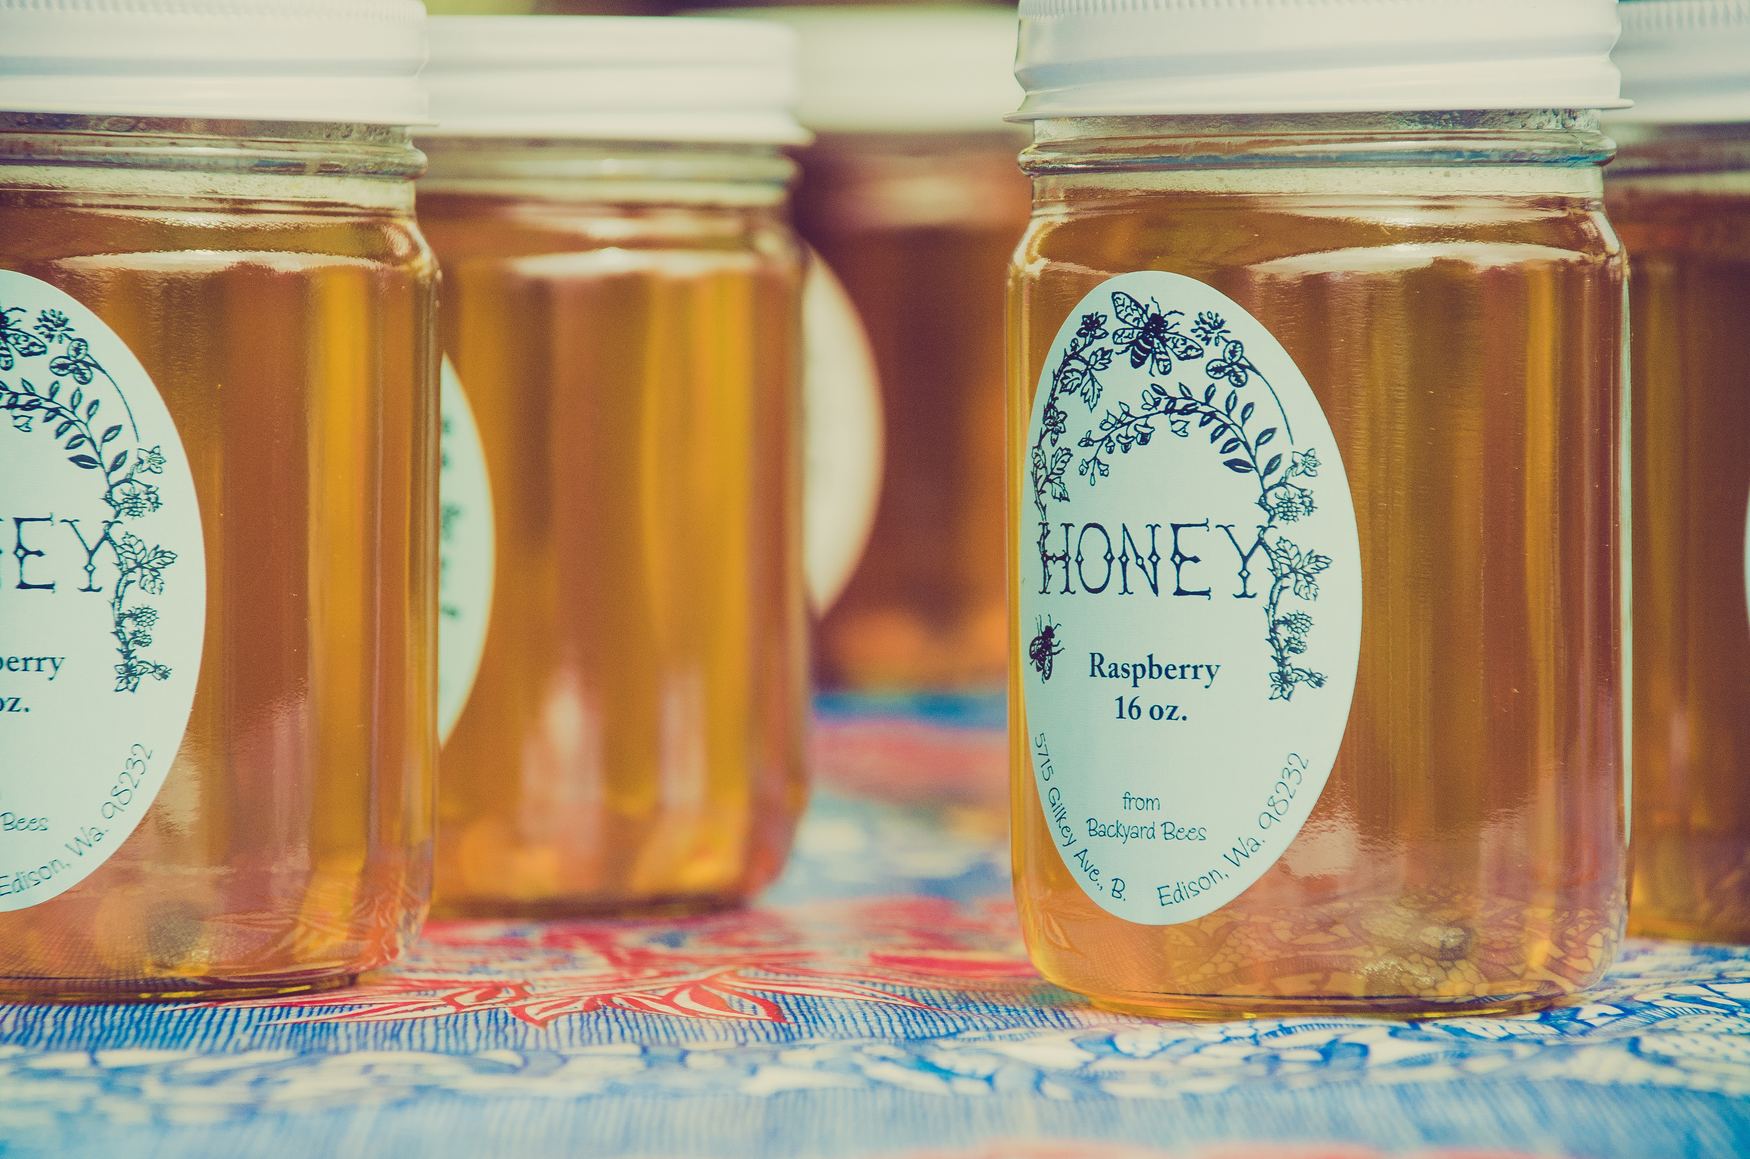 honey show, sandown parK, ESHER, food and drink, whats on, events surrey, october